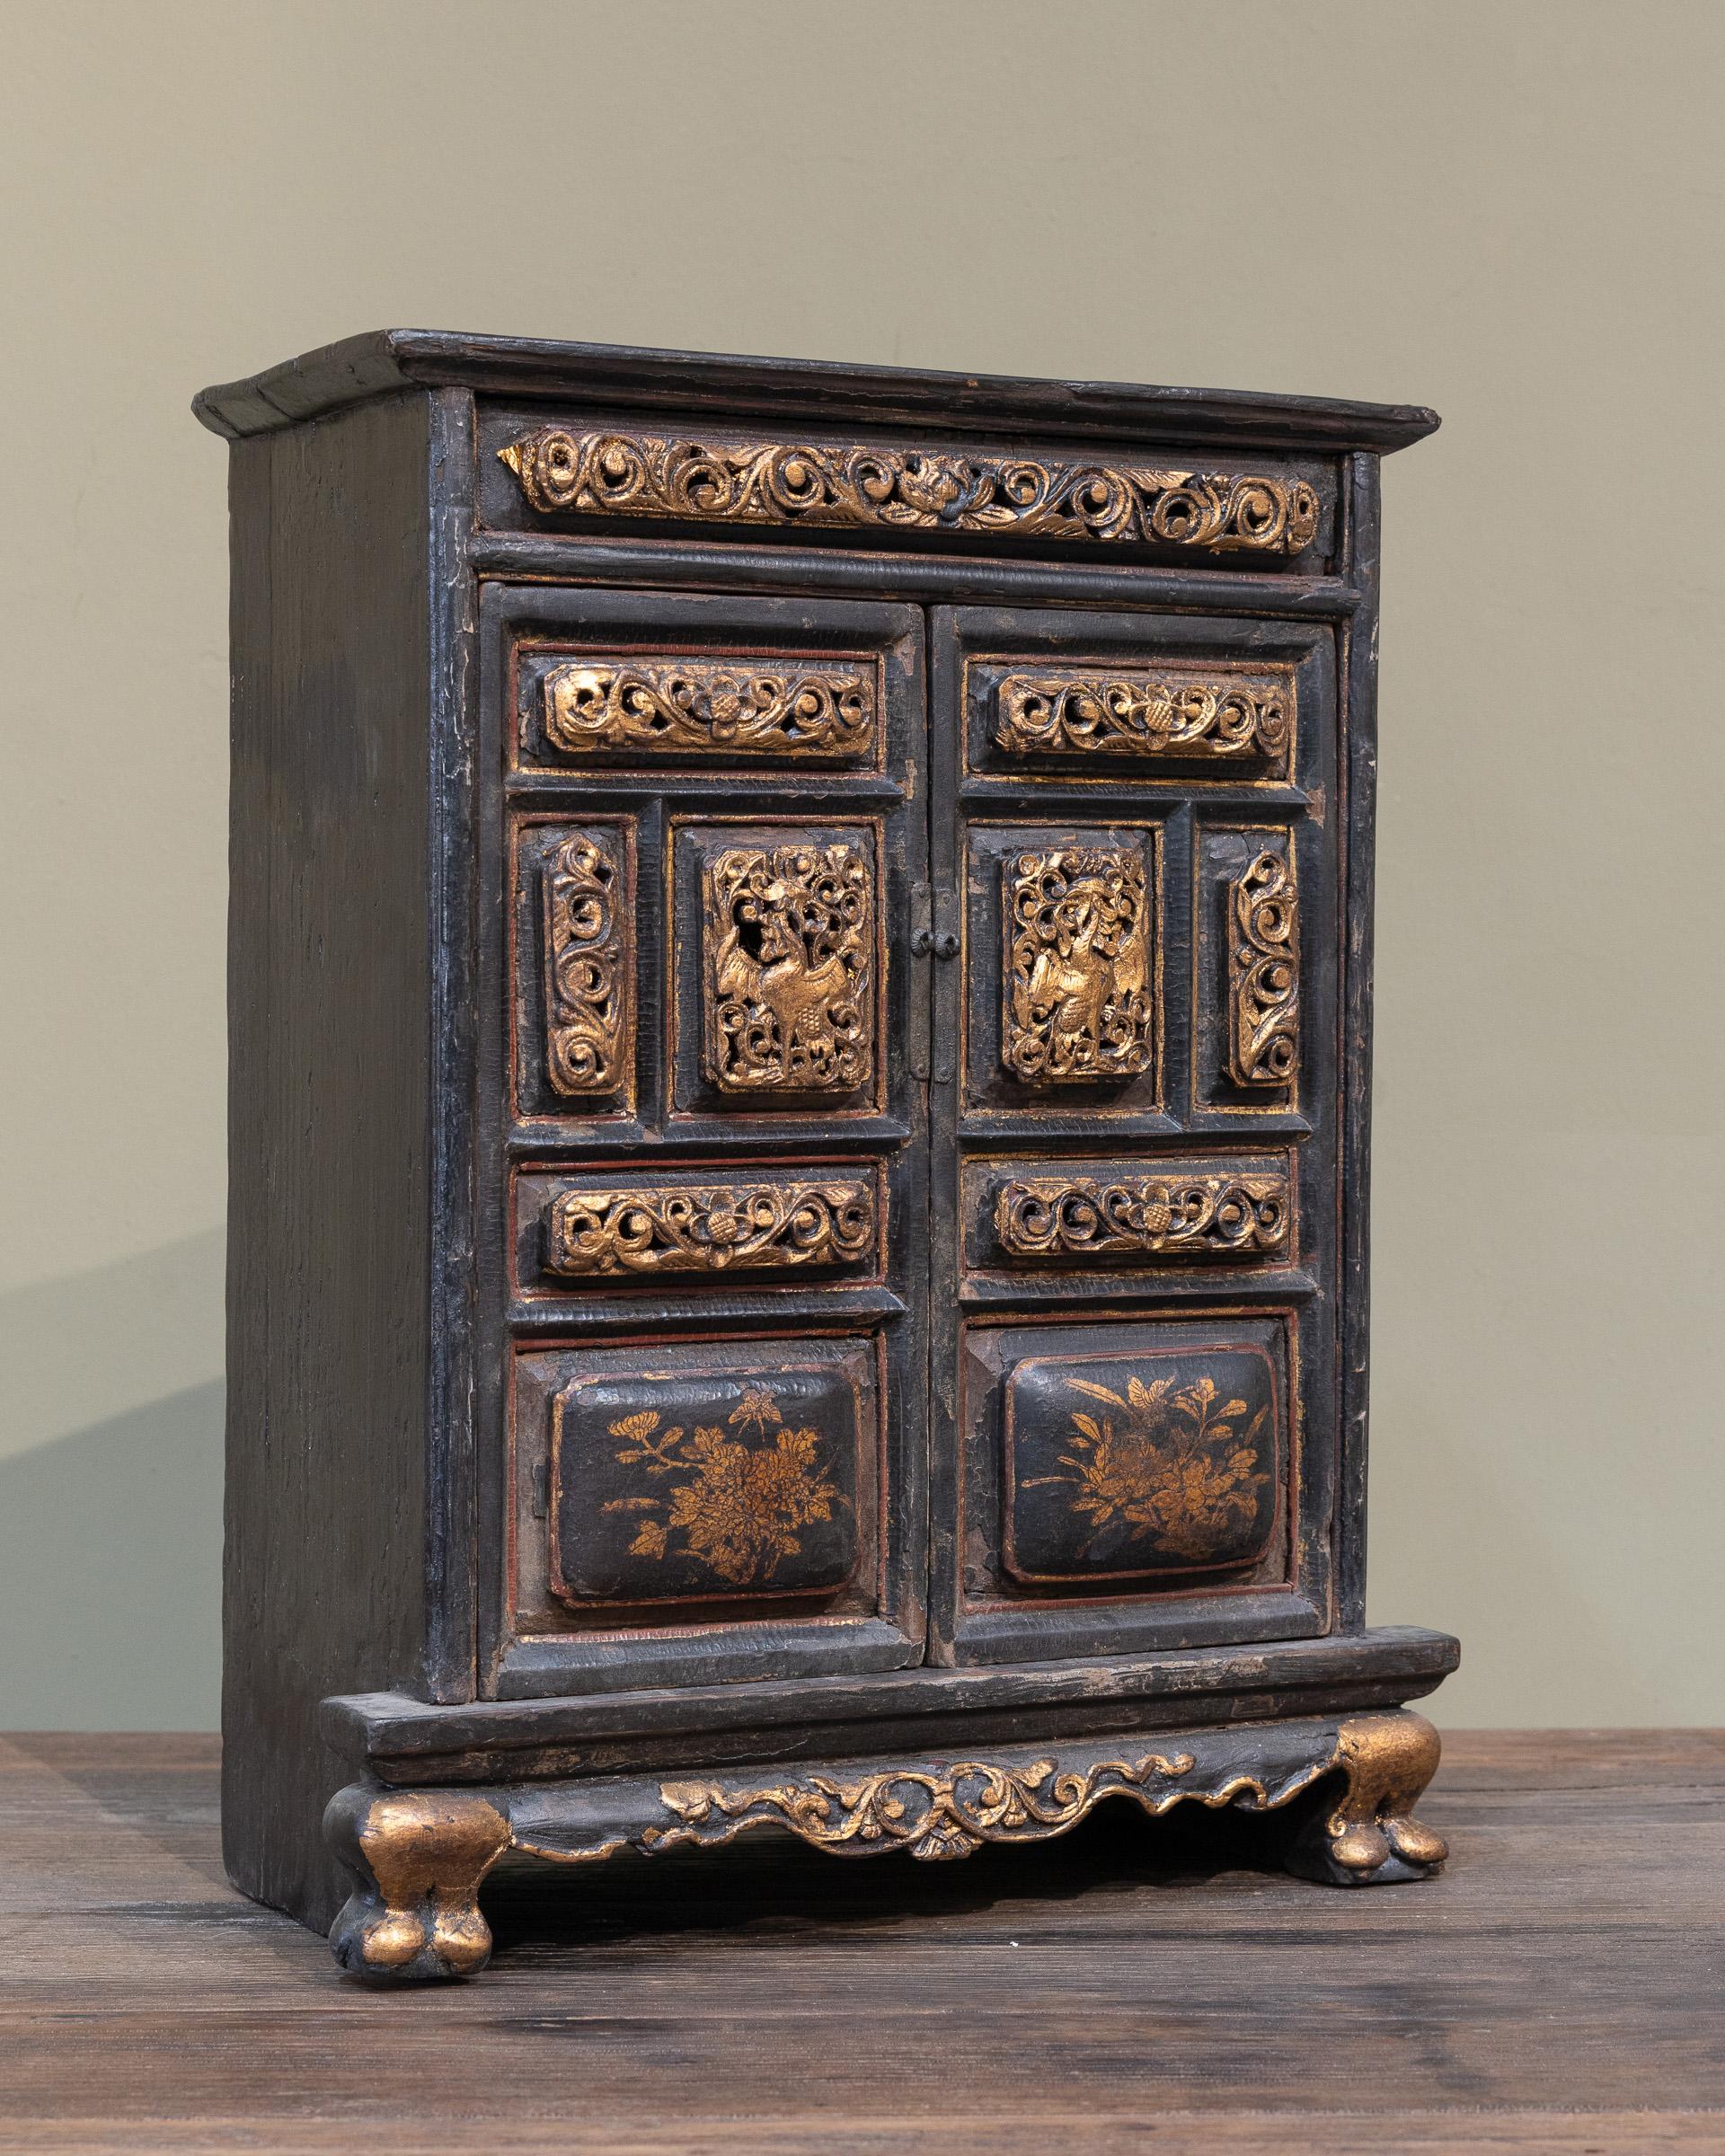 An antique carved box from Chaozhou city, in Guangdong, China. The black and gold colours, as well as the bulbous designs on the front are all distinct characteristics of Chaozhou designs. The main carvings on the doors feature a pair of phoenix,